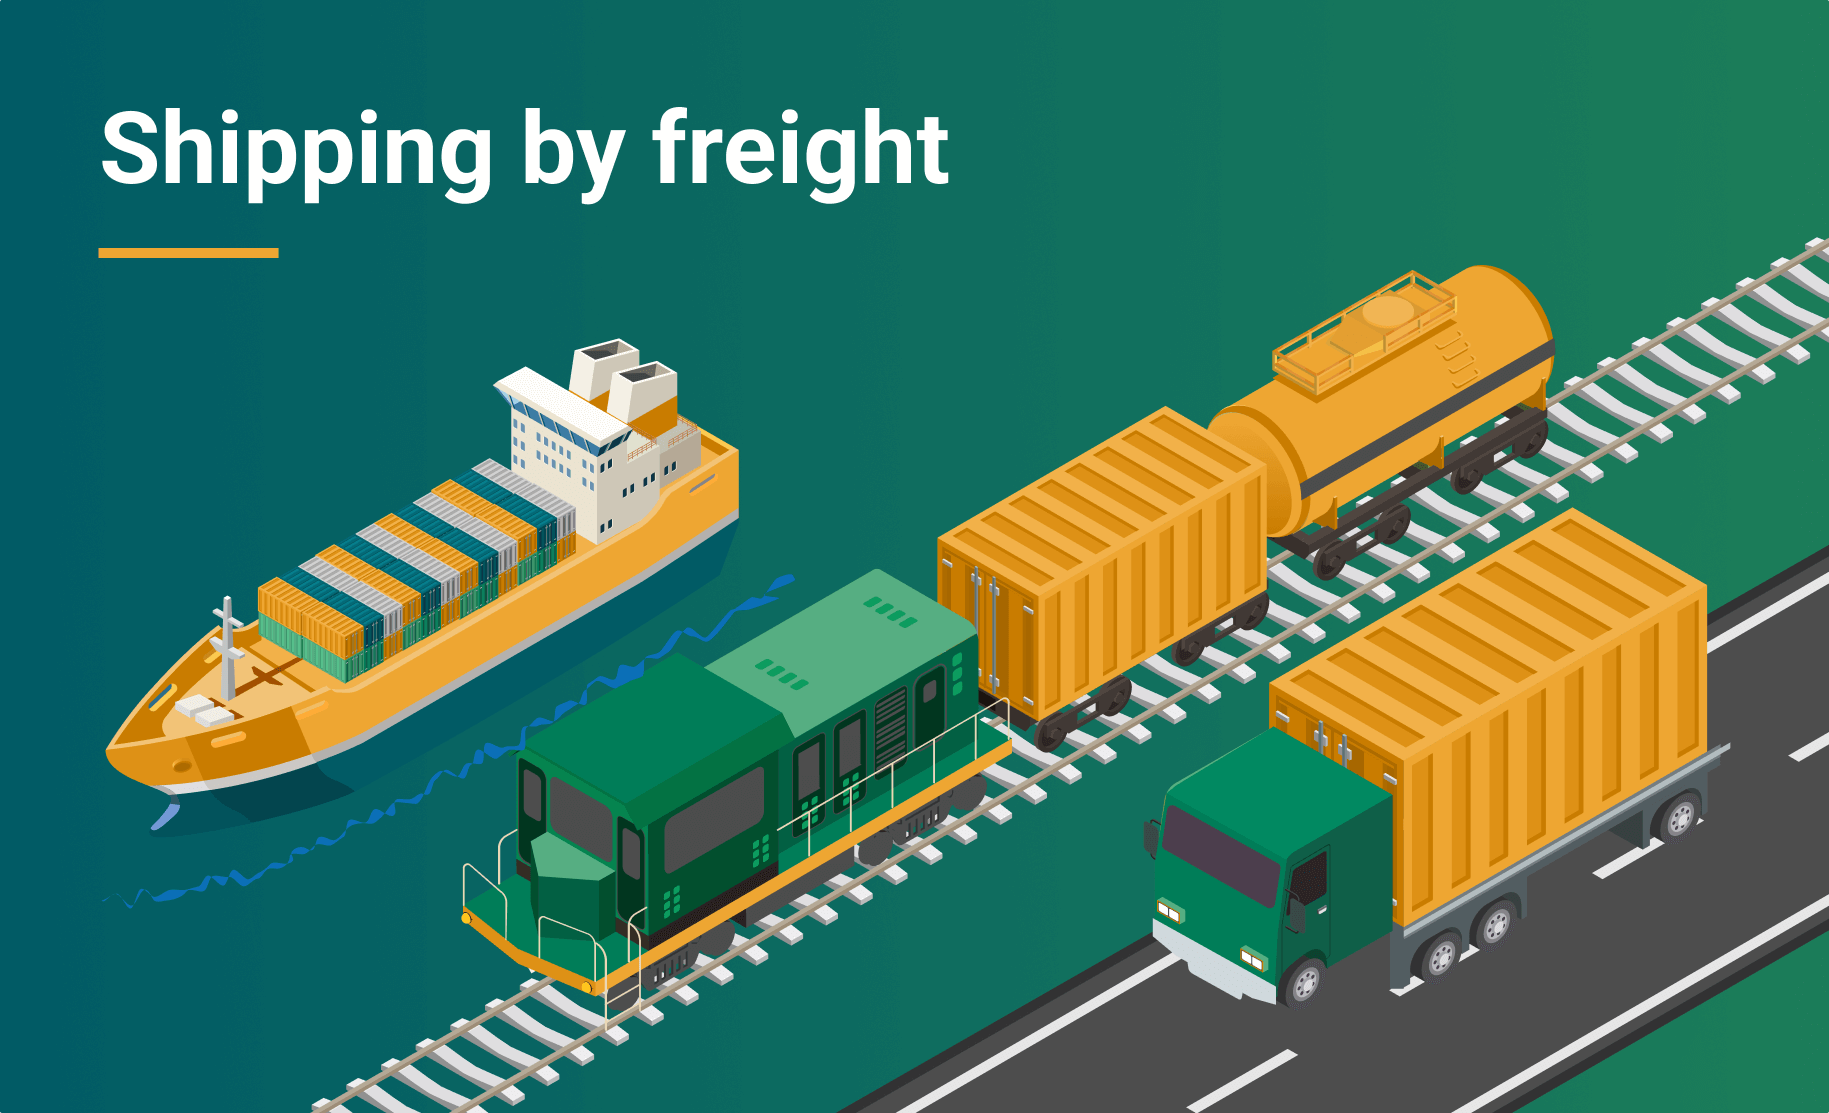 shipping by freight image